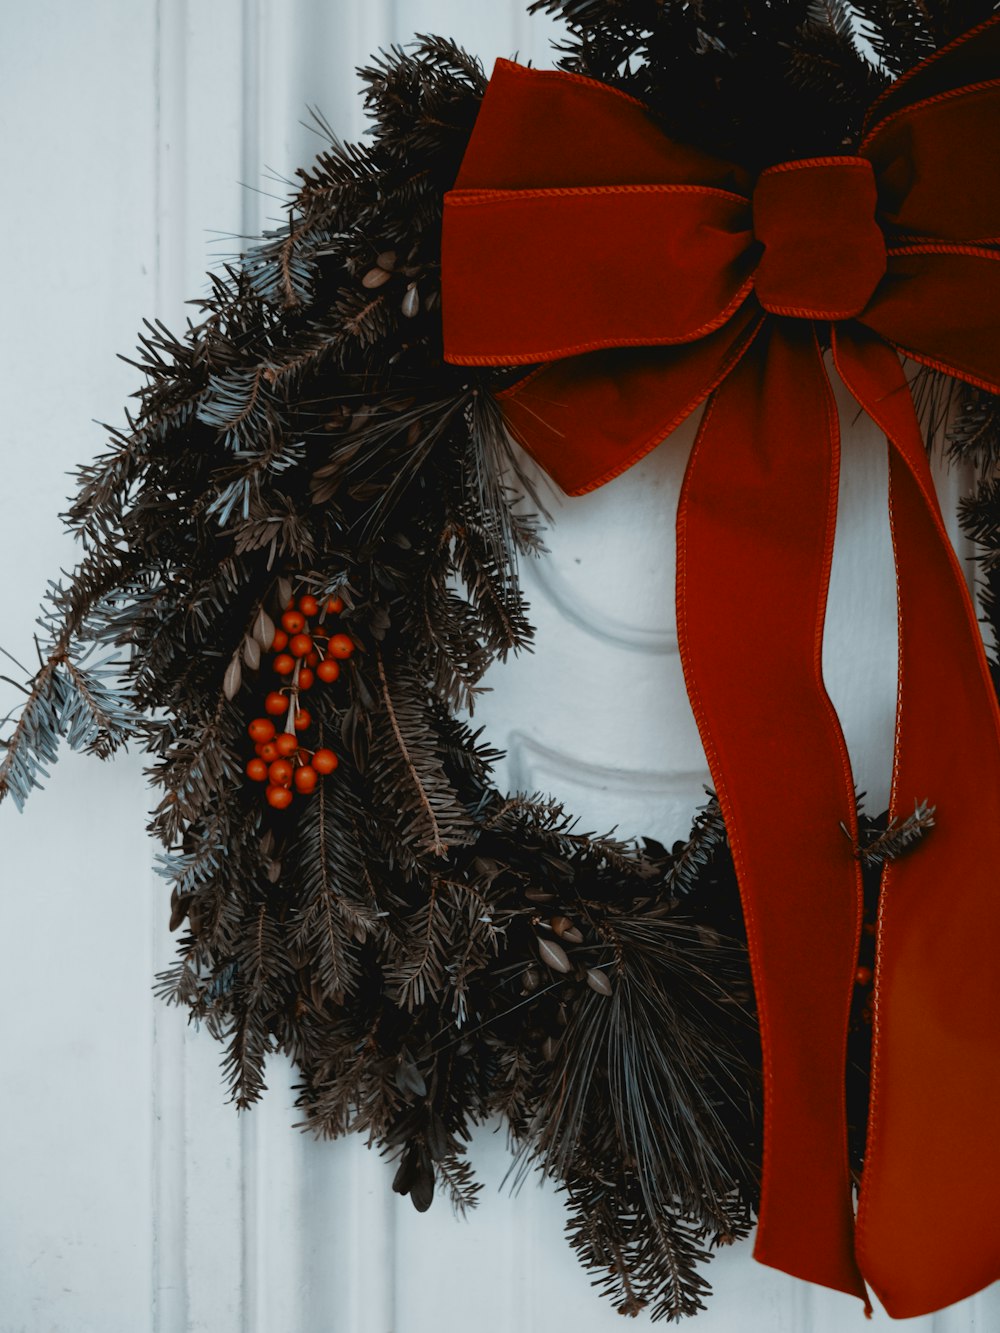 a wreath with a red bow hanging on a door